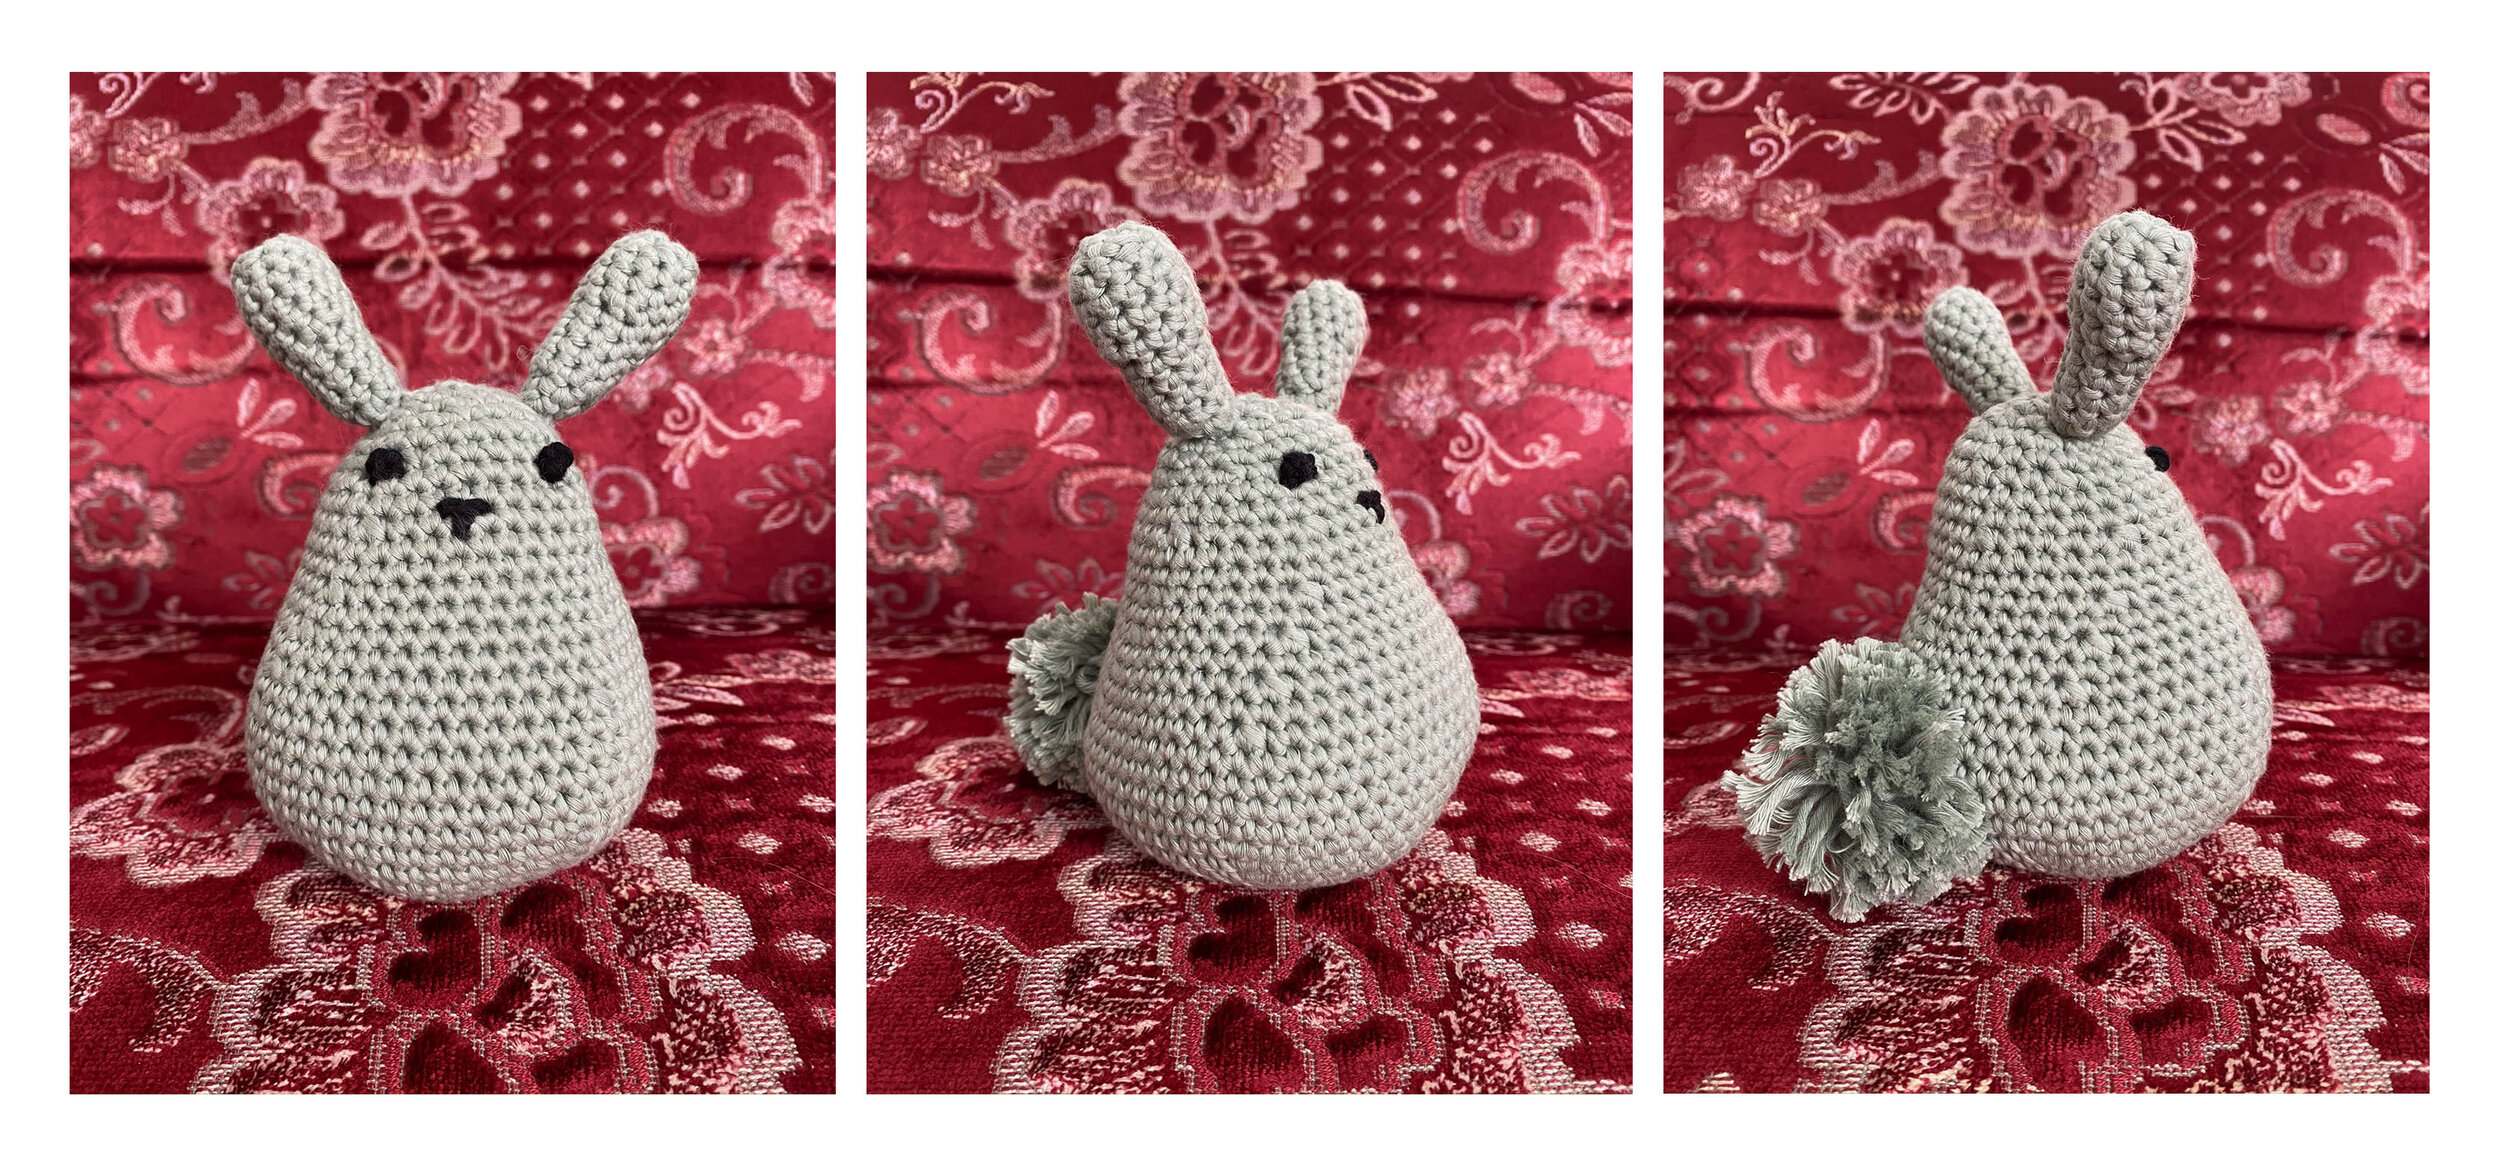  Crochet bunny, pattern courtesy of Wool and the Gang. 